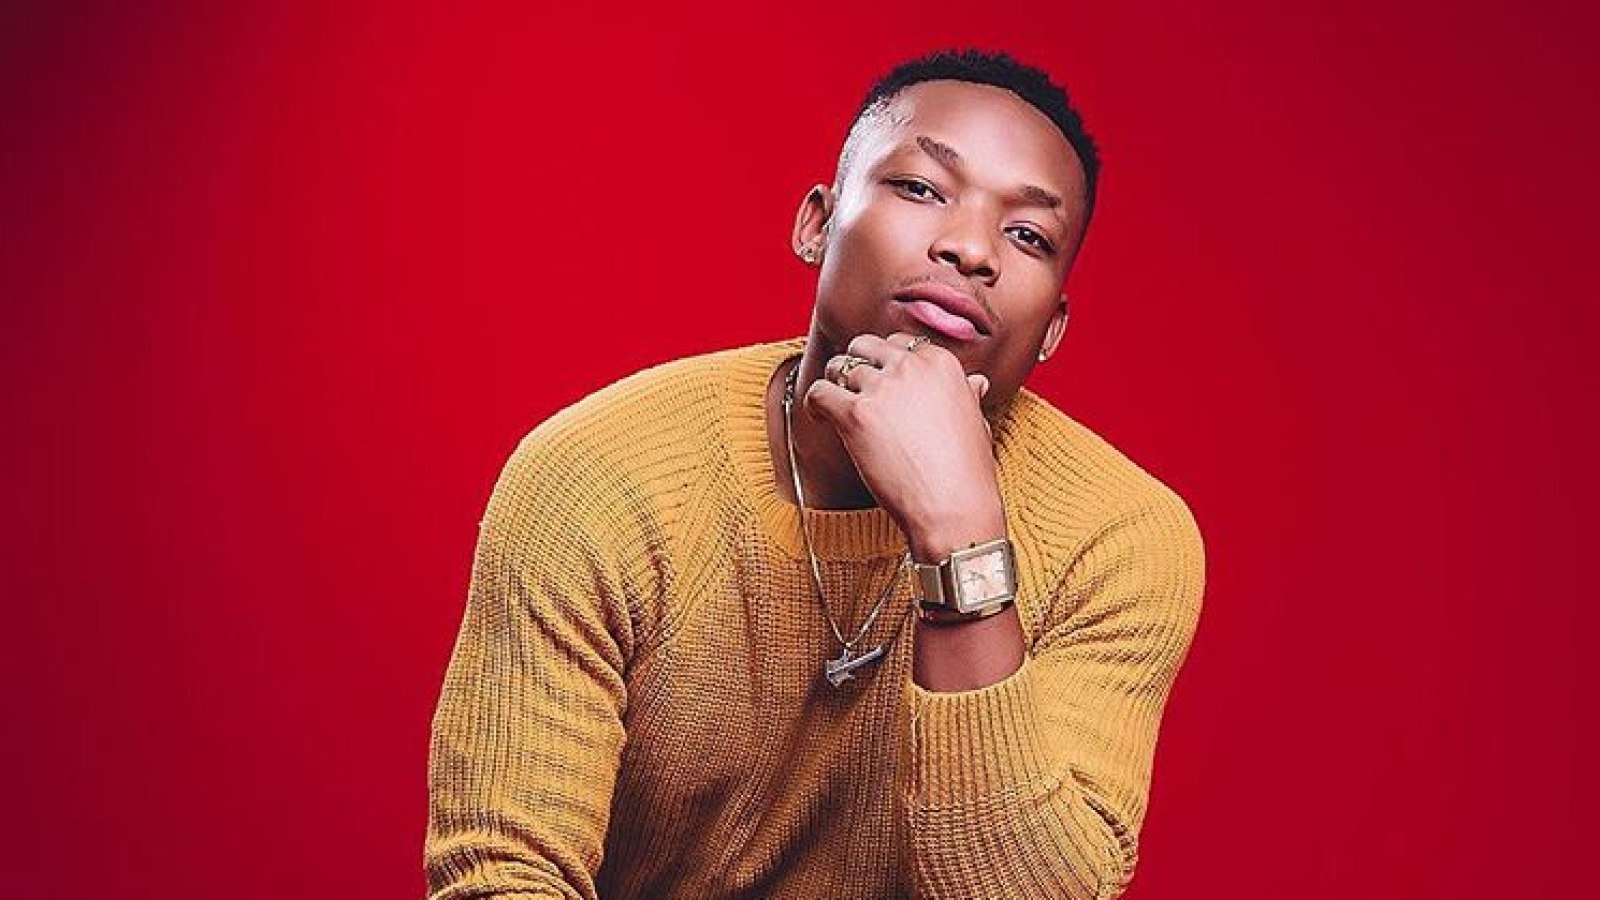 Otile Brown reaches out to his ex-girlfriend in ‘Quarantine’ (Video)